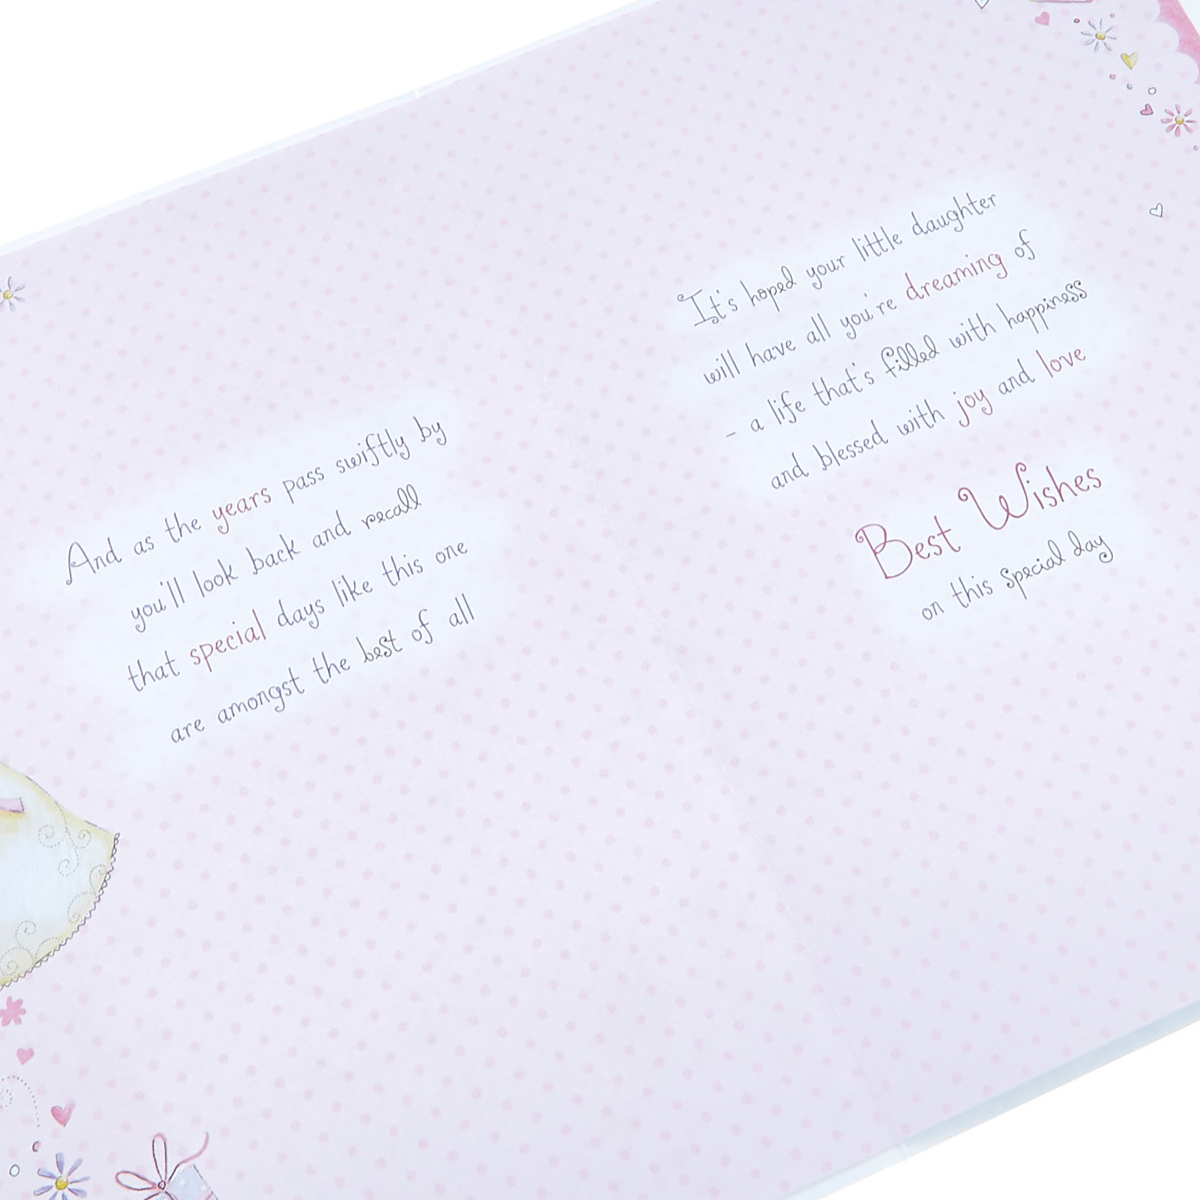 Christening Card - For Your Daughter